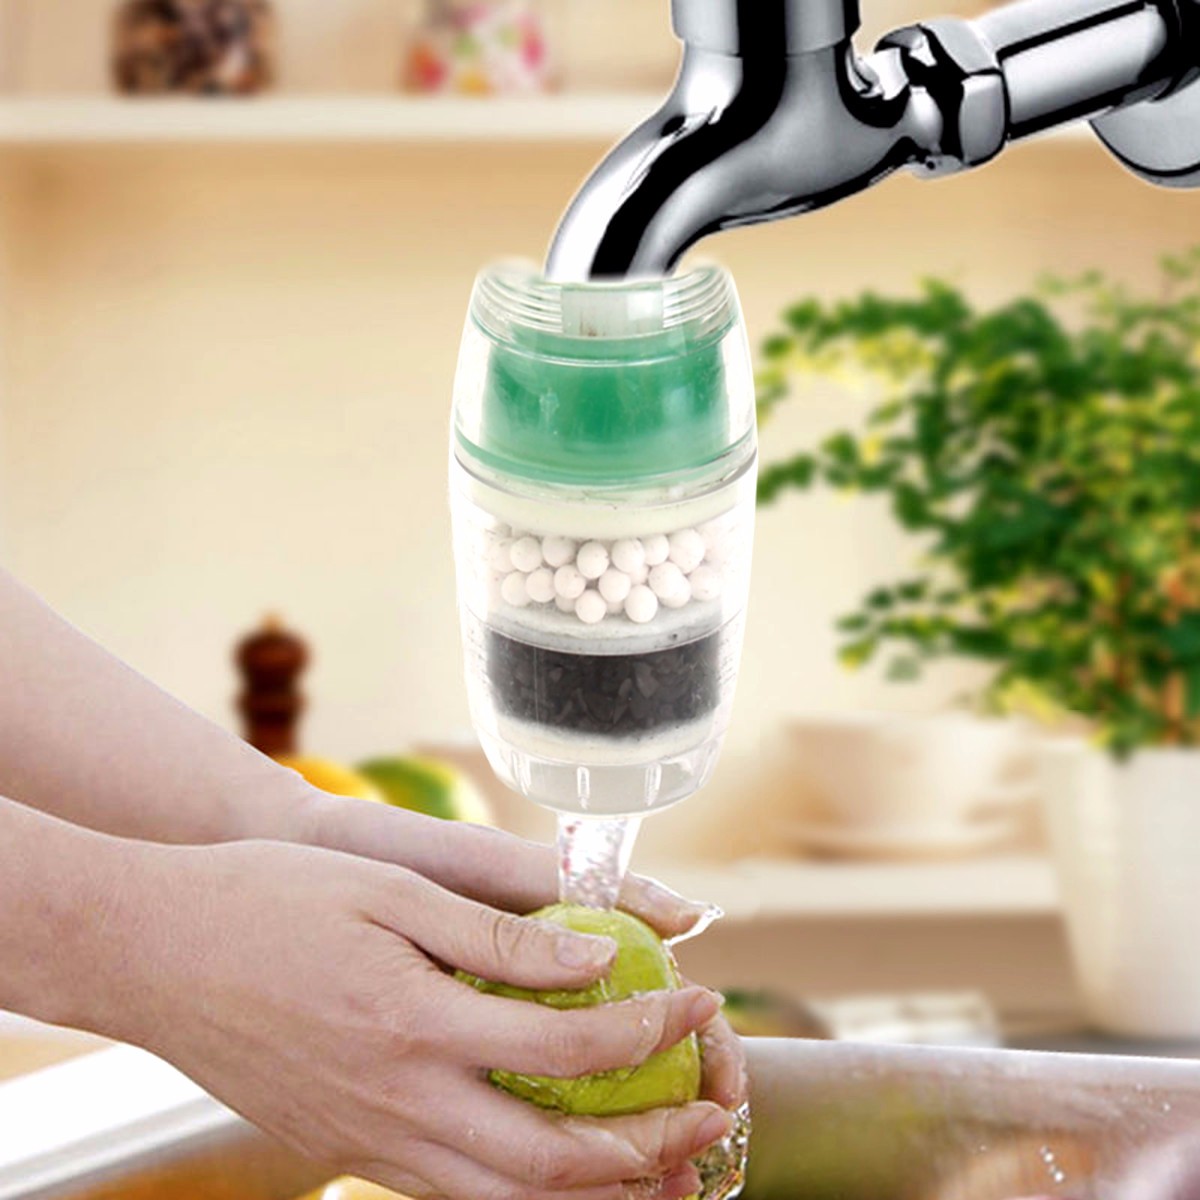 Coconut-Carbon-Faucet-Tap-Water-Clean-Purifier-Home-Kitchen-Water-Purify-Filter-Tool-1401486